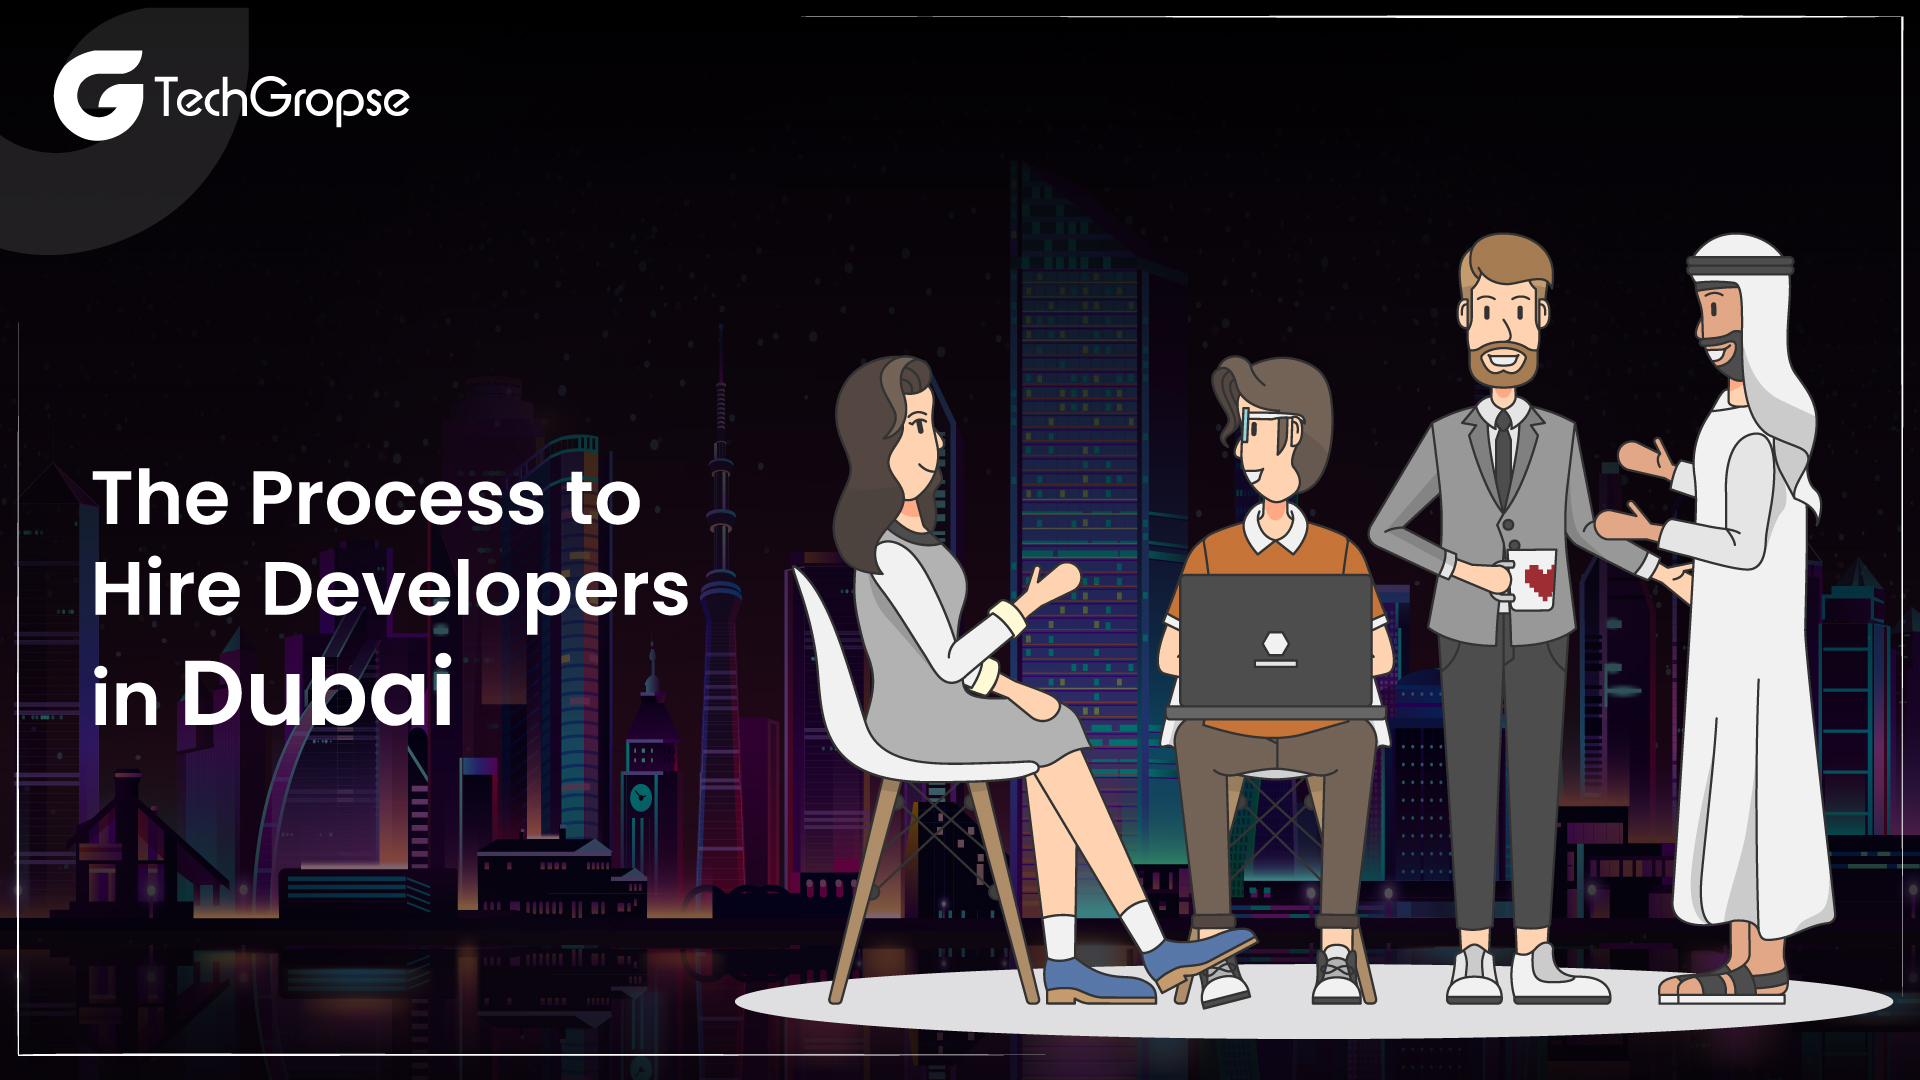 The Process to Hire Developers in Dubai